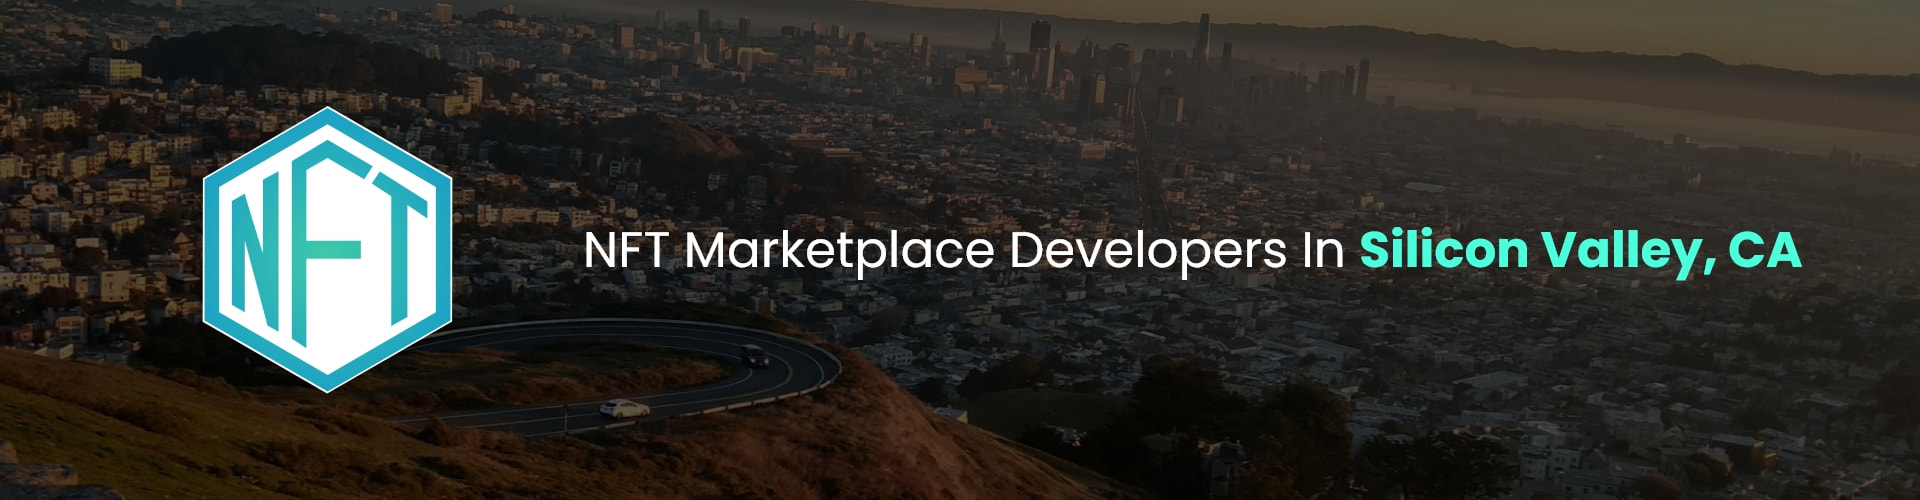 hire nft marketplace developers in silicon valley